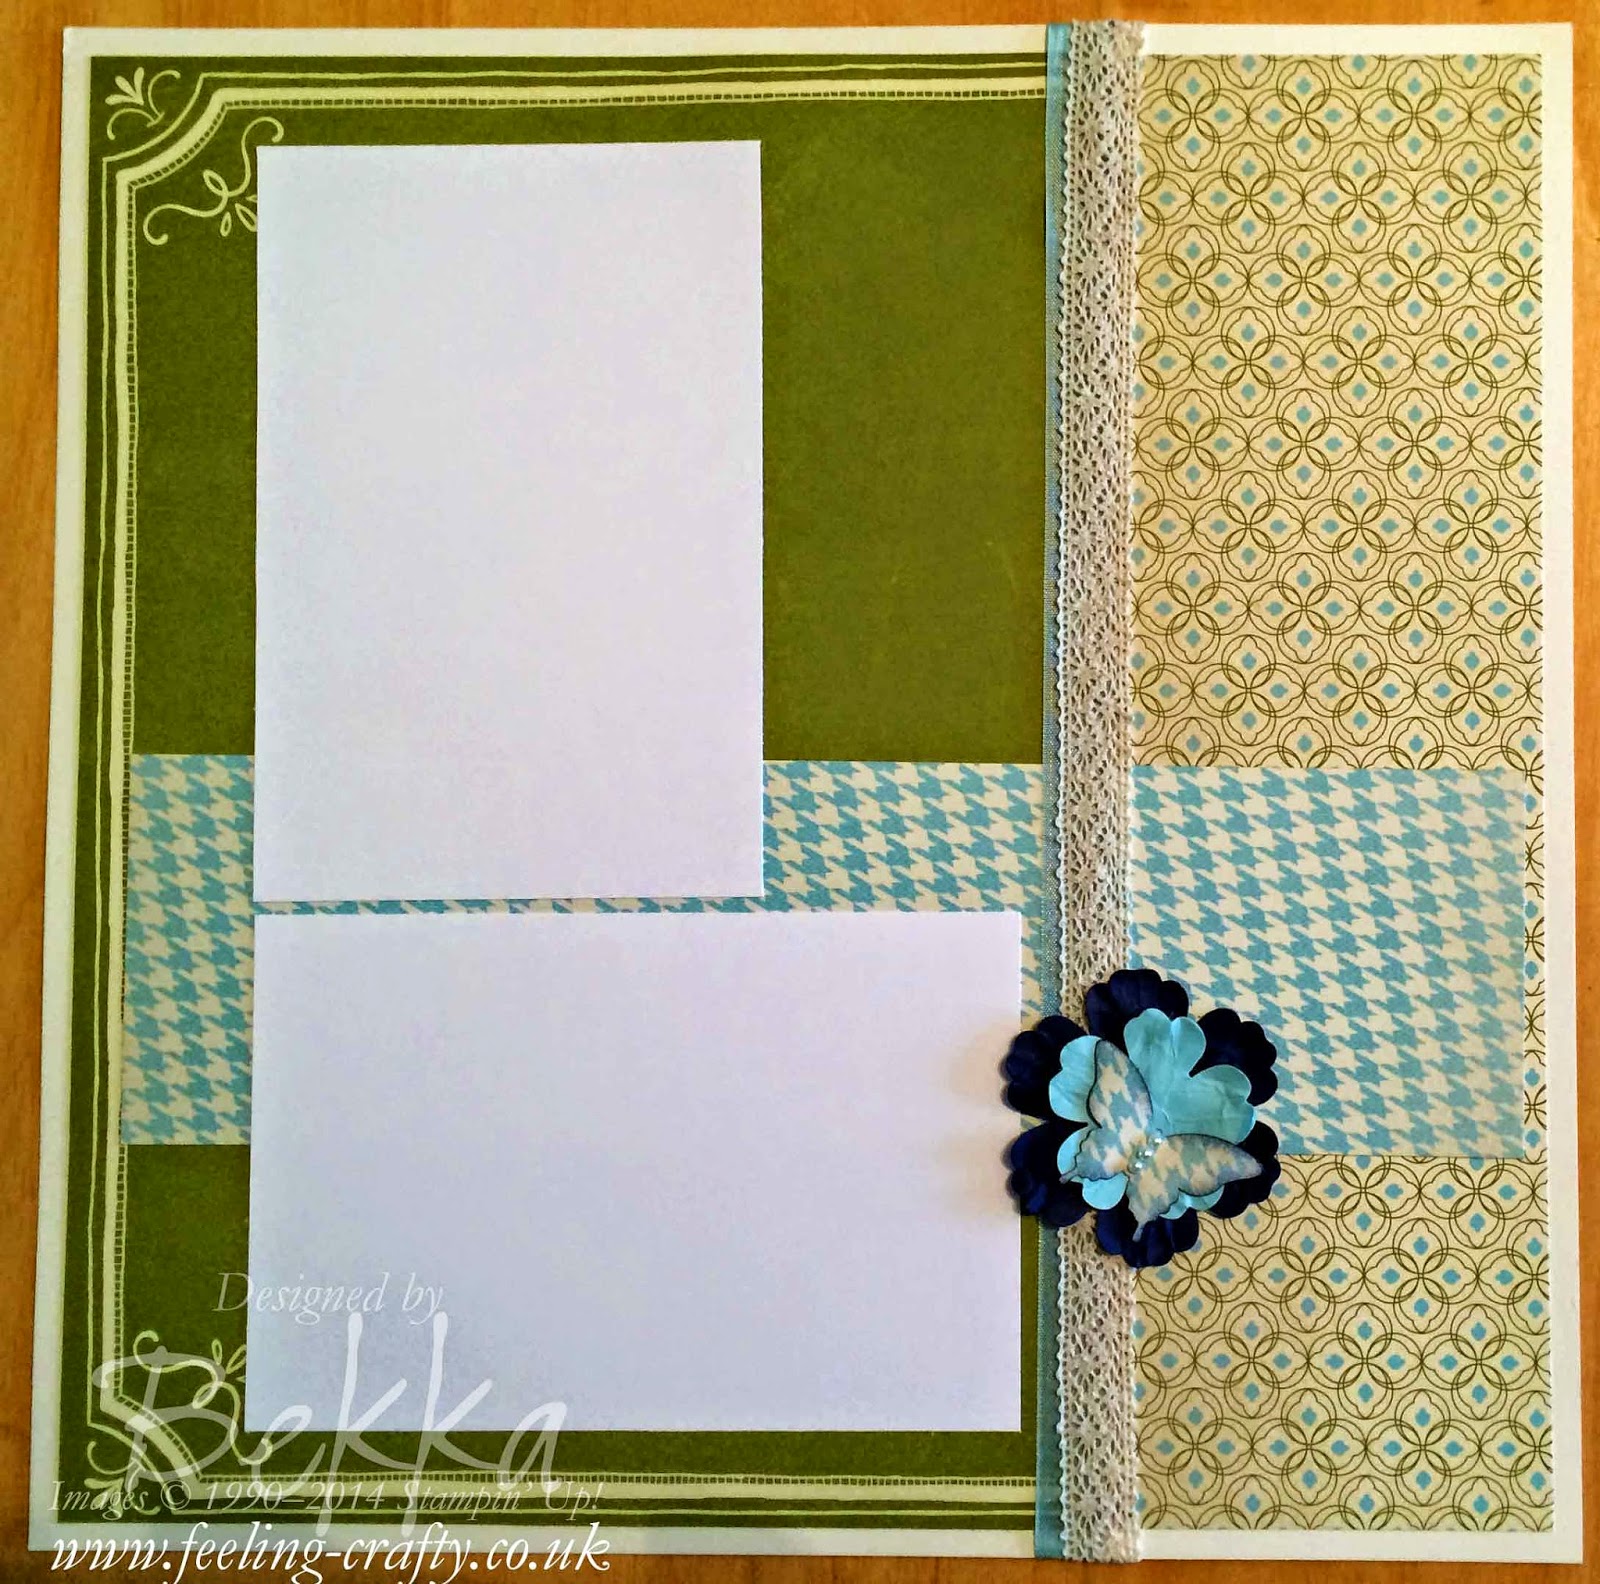 Stampin' Up! Etcetra Papers Scrapbook Page by UK Based Demonstrator Bekka - check her blog every Saturday for great scrapbook inspiration